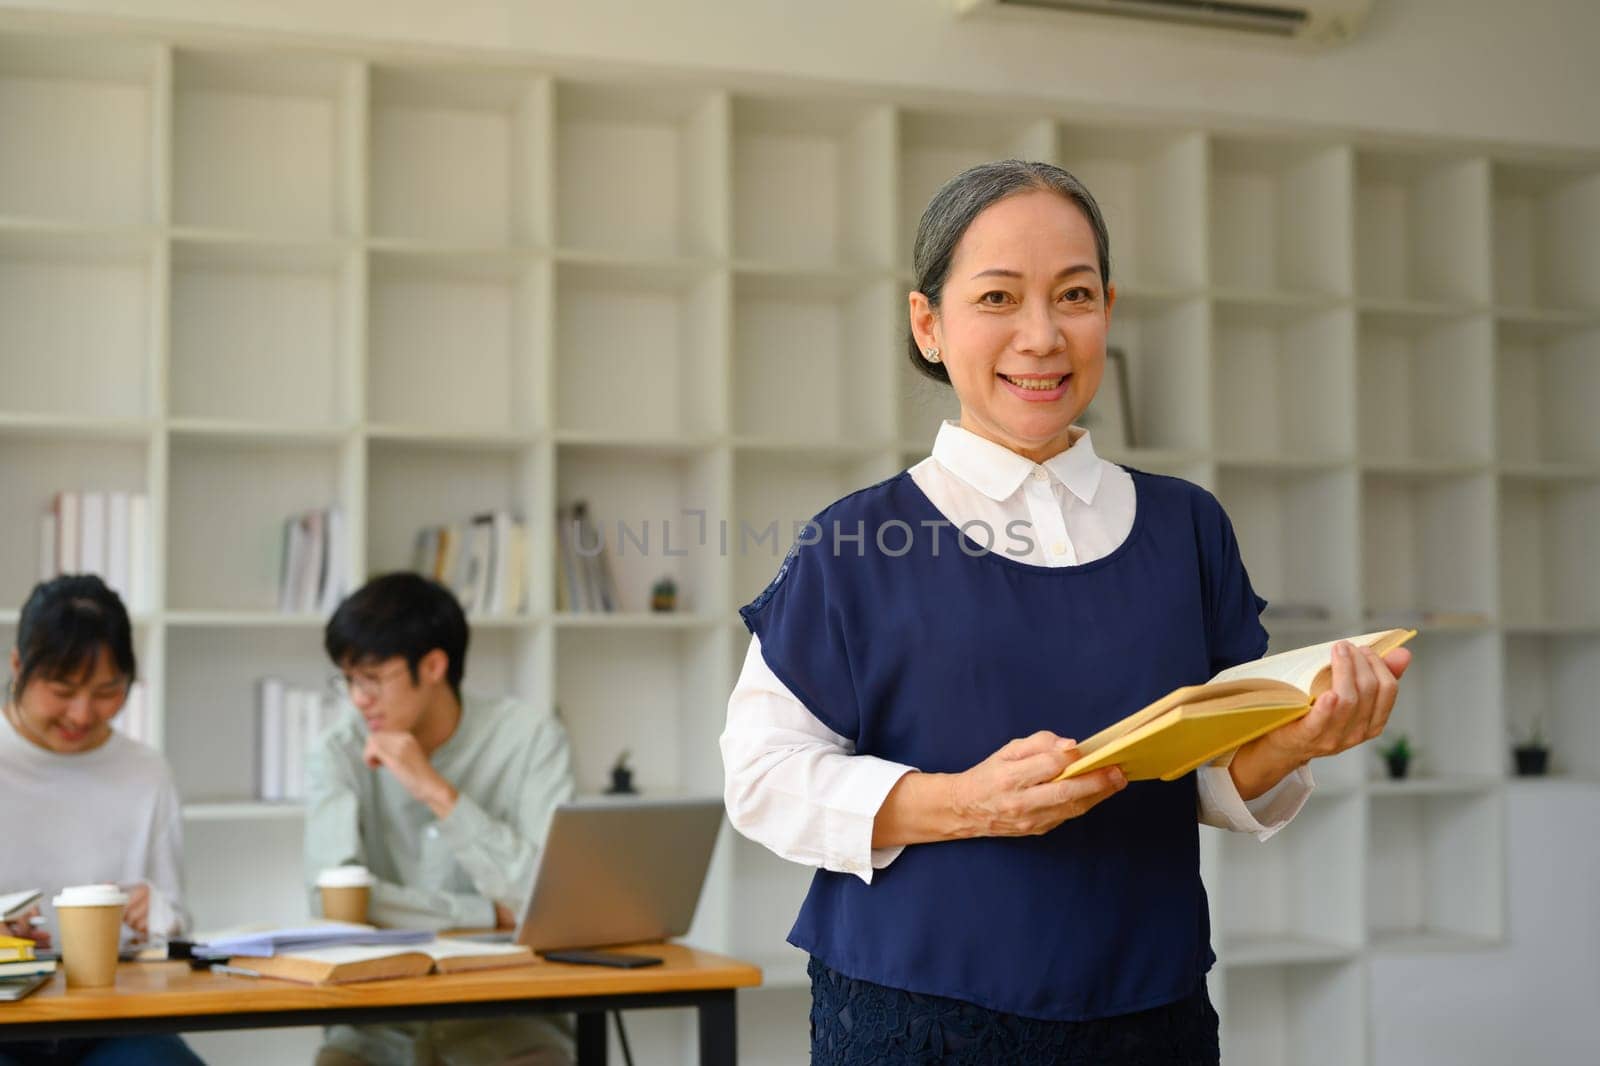 Portrait of friendly smiling mature professor holding book standing in class.